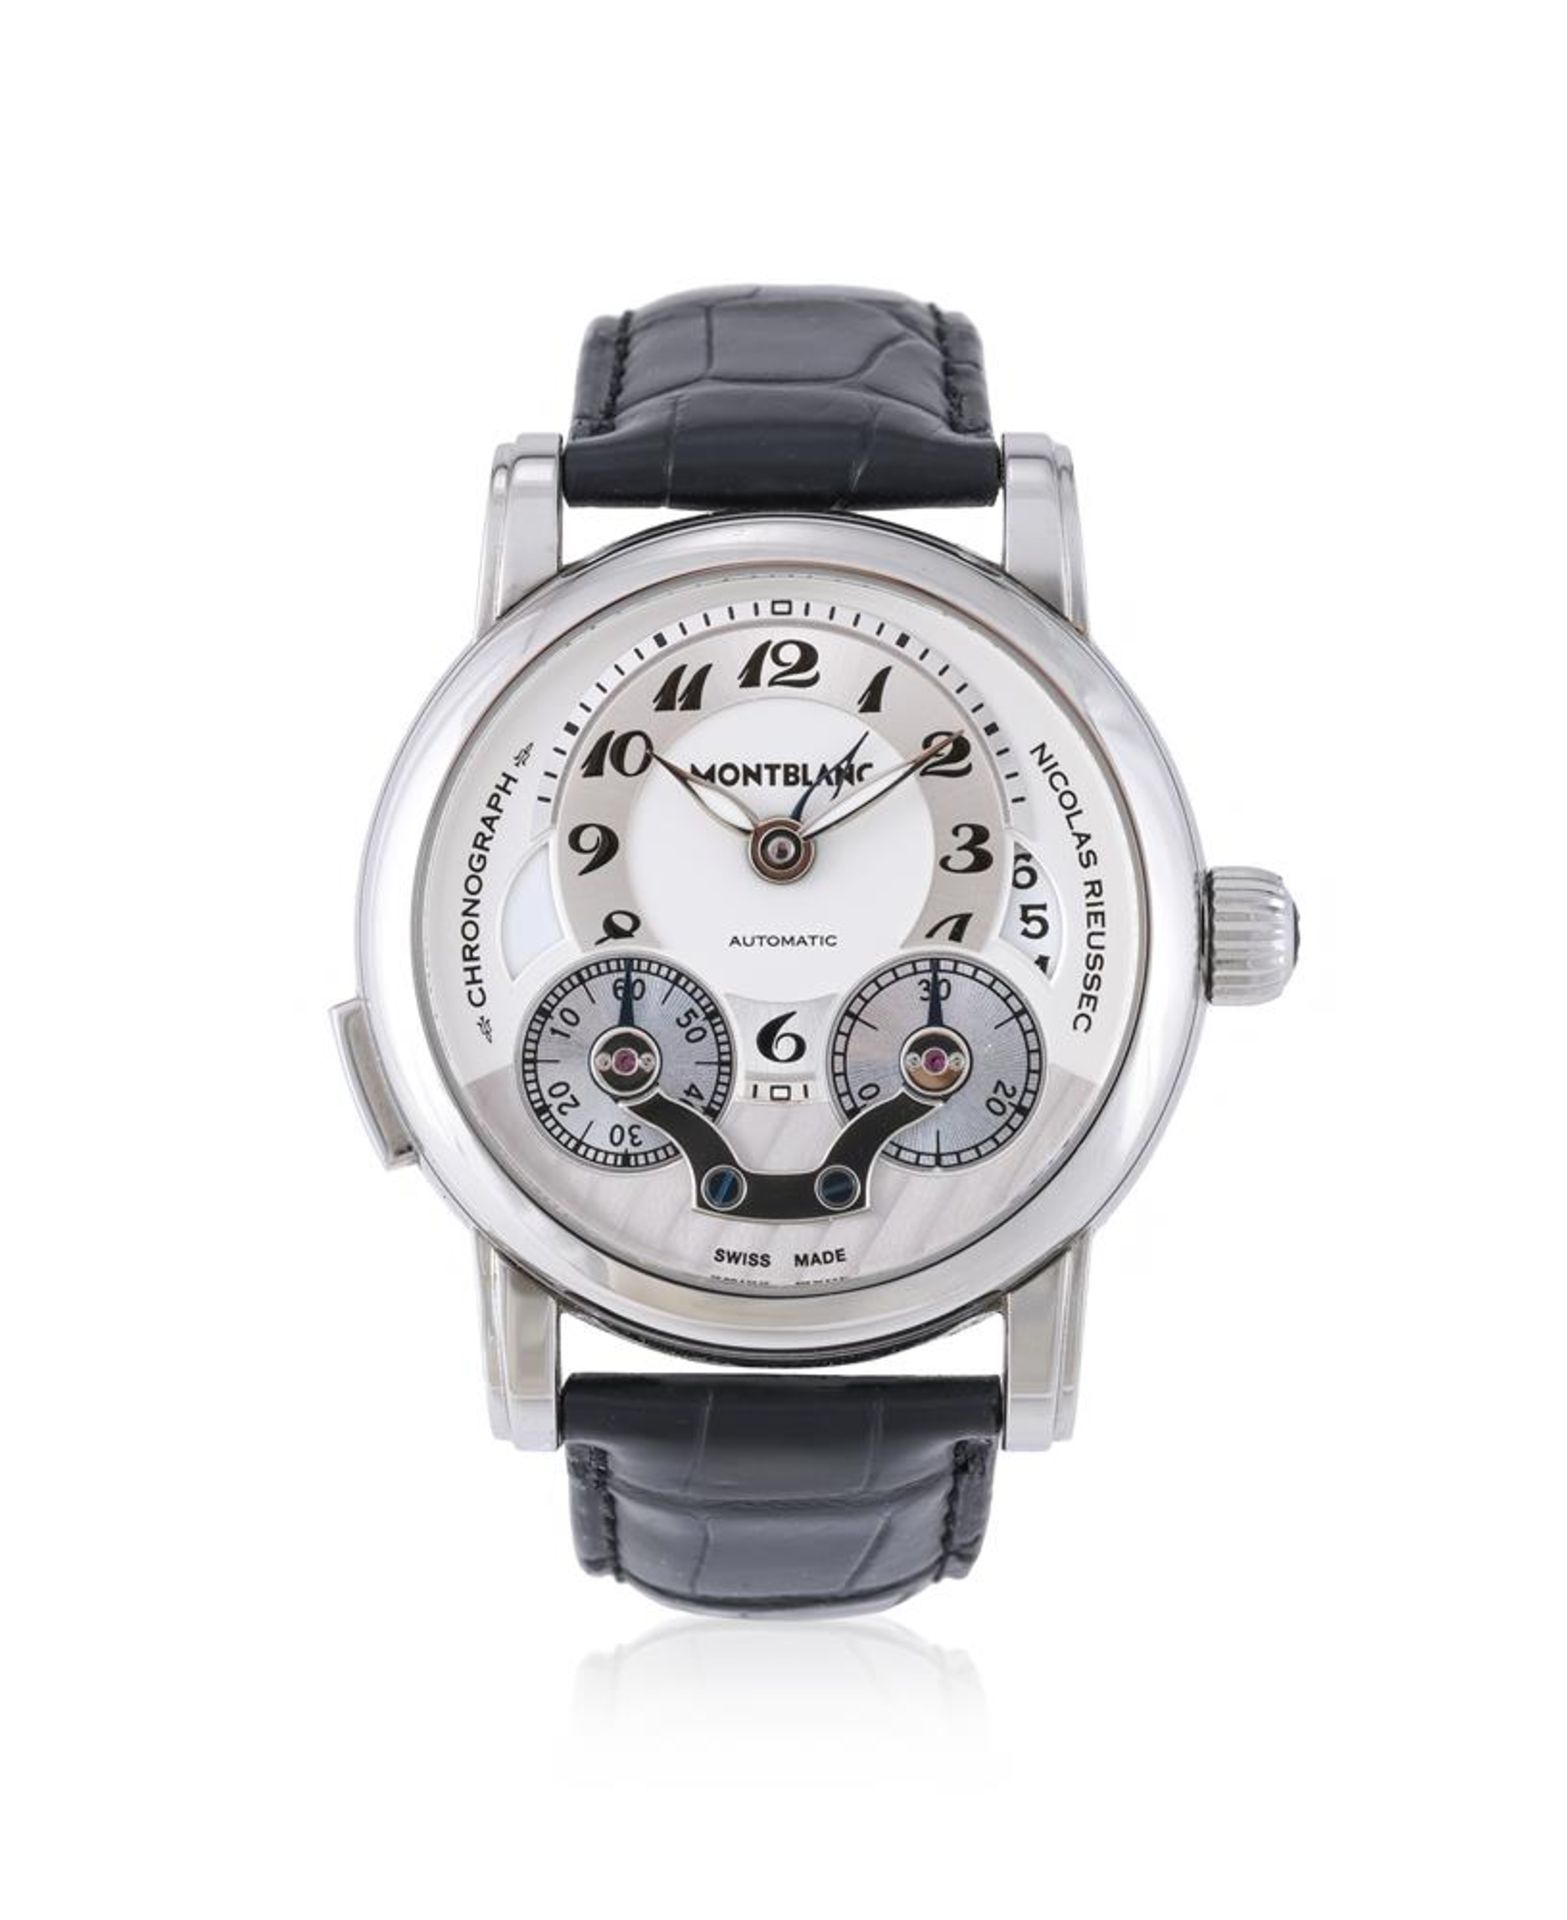 Y MONTBLANC, NICHOLAS RIEUSSEC, REF. M29447 7138, A STAINLESS STEEL CHRONOGRAPH WRISTWATCH